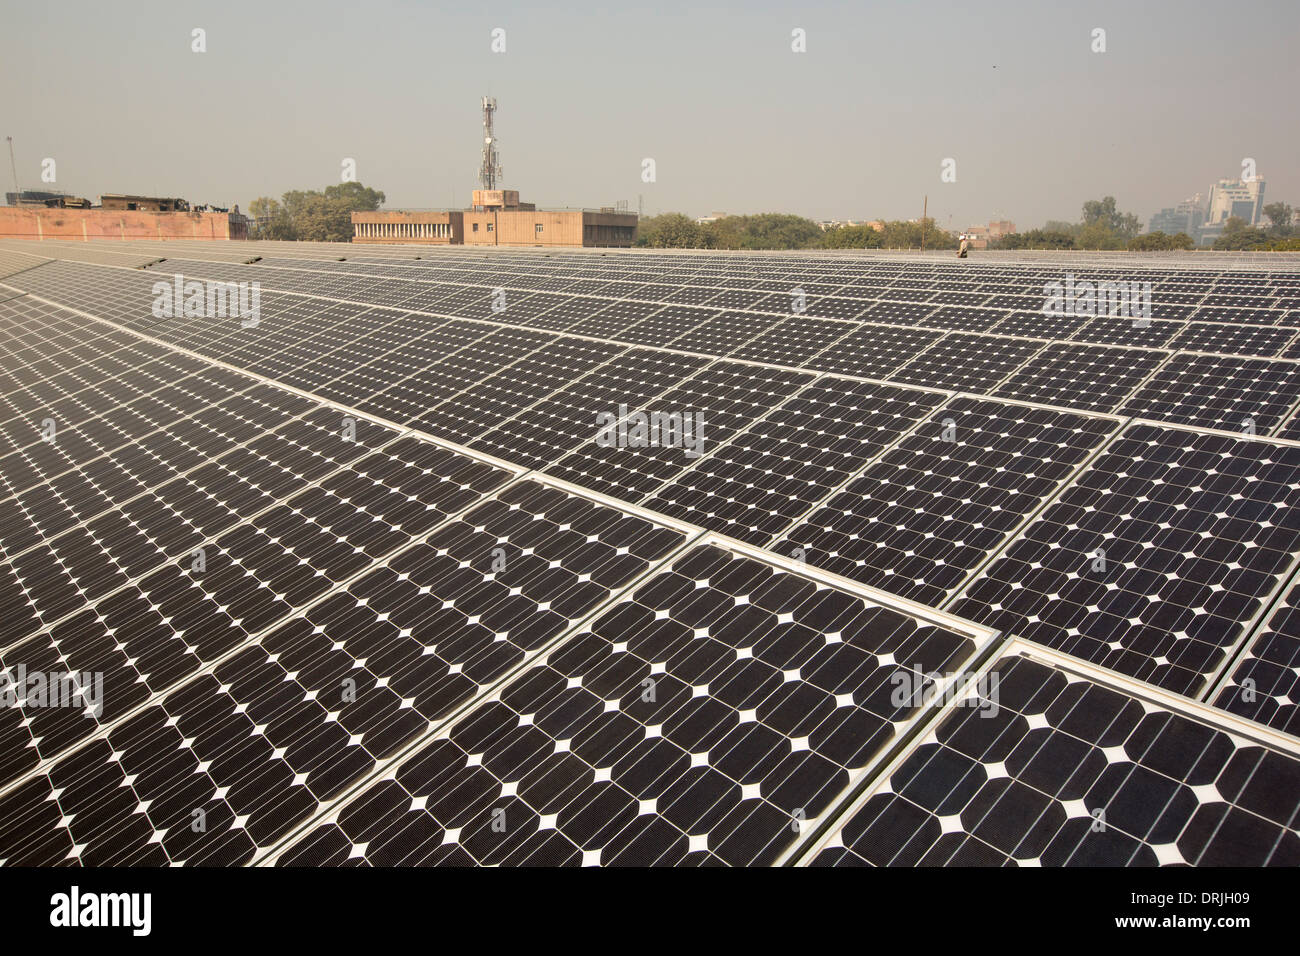 A 1 MW solar power station run by Tata power on the roof of an electricity company in Delhi, India. Stock Photo